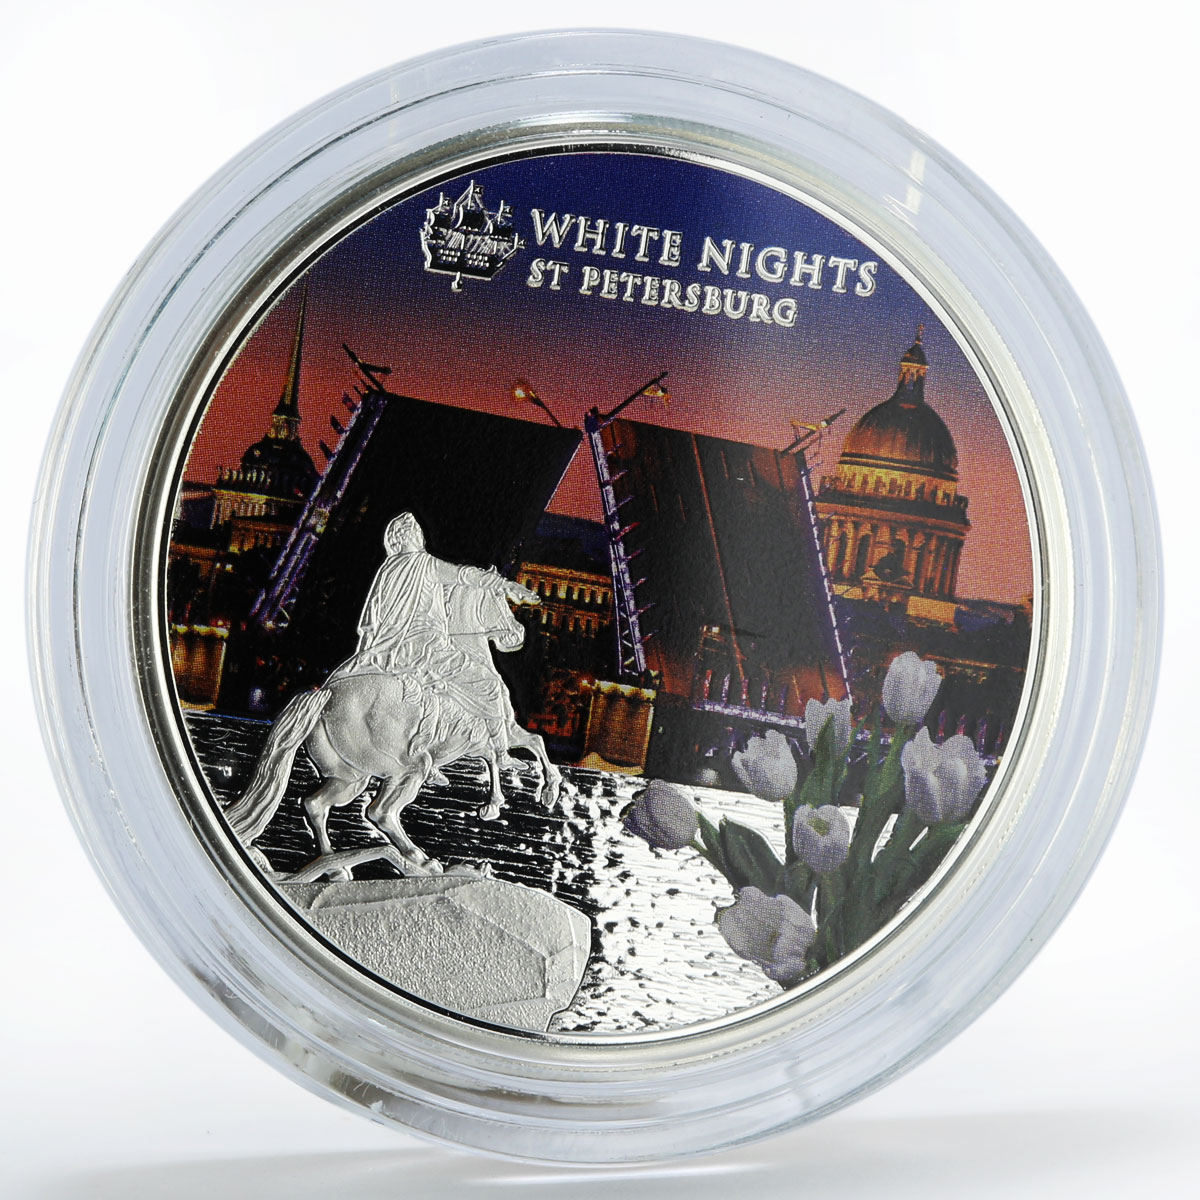 Tanzania 500 shillings White Nights of St Petersburg Bridges silver coin 2020